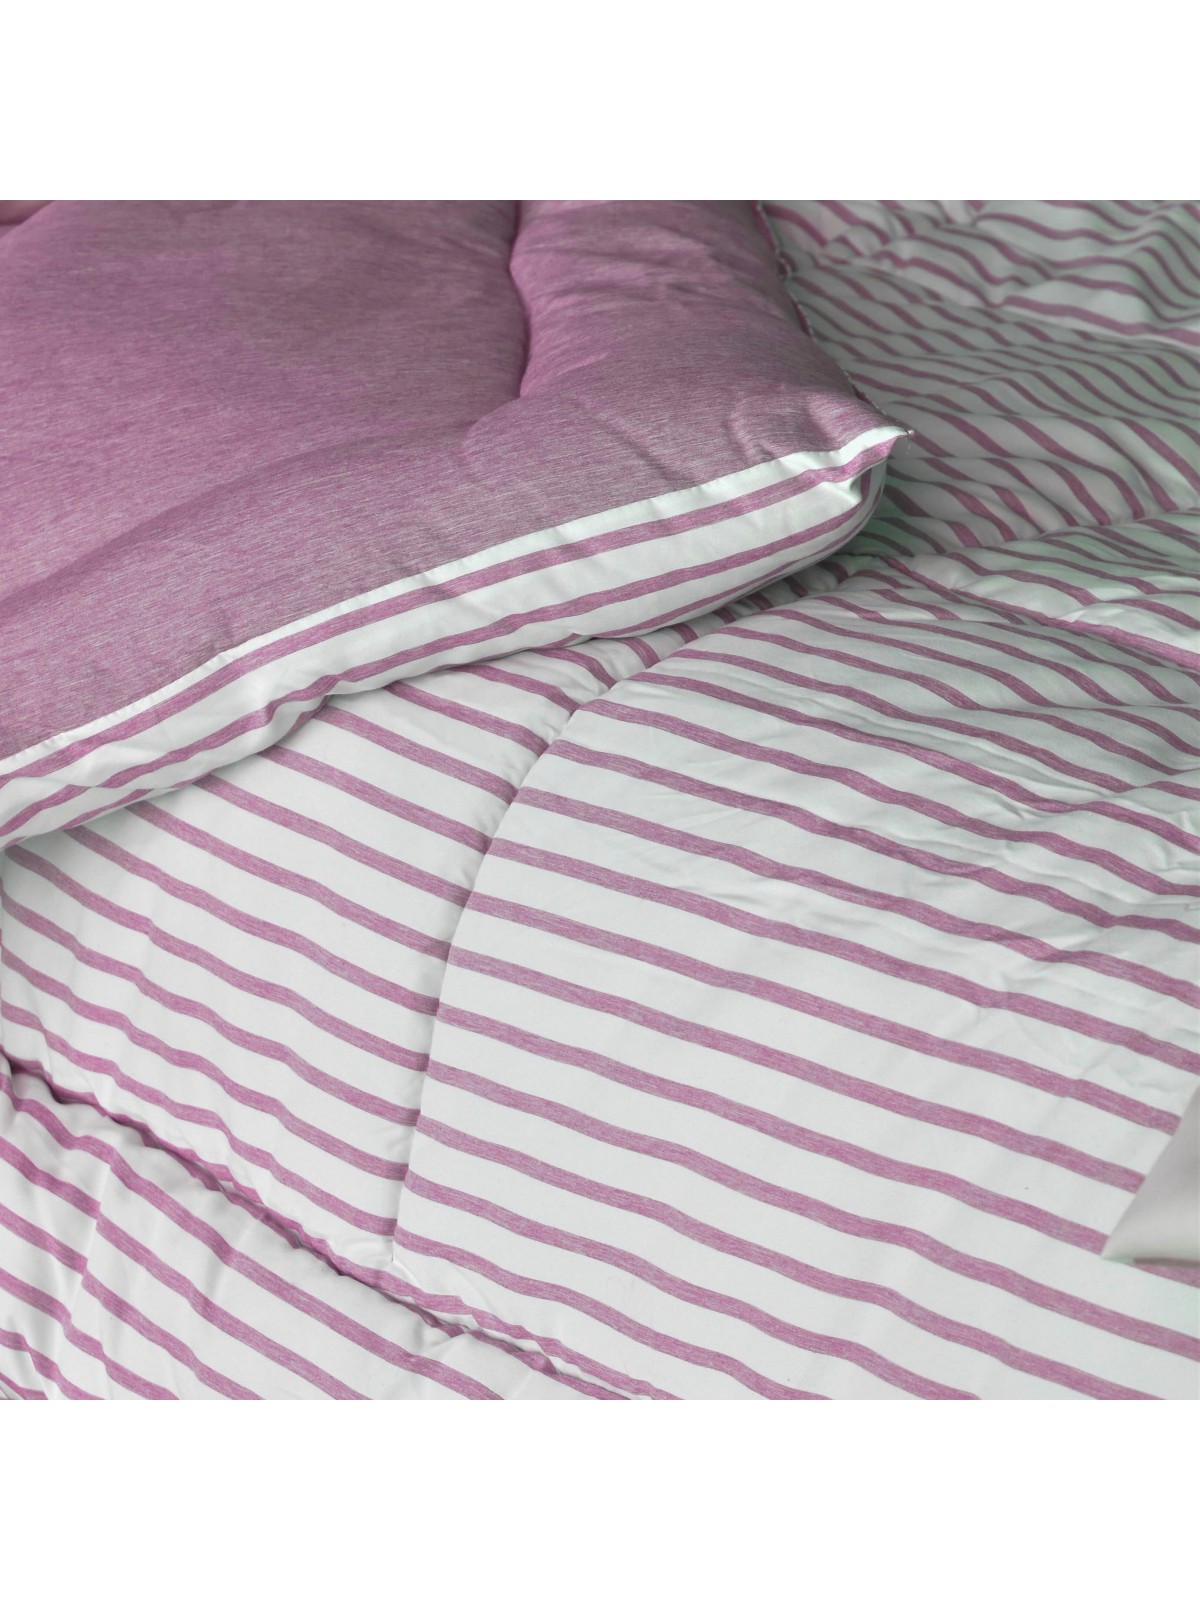 Quilt Double Duvet Shabby Chic striped Beige or Grey